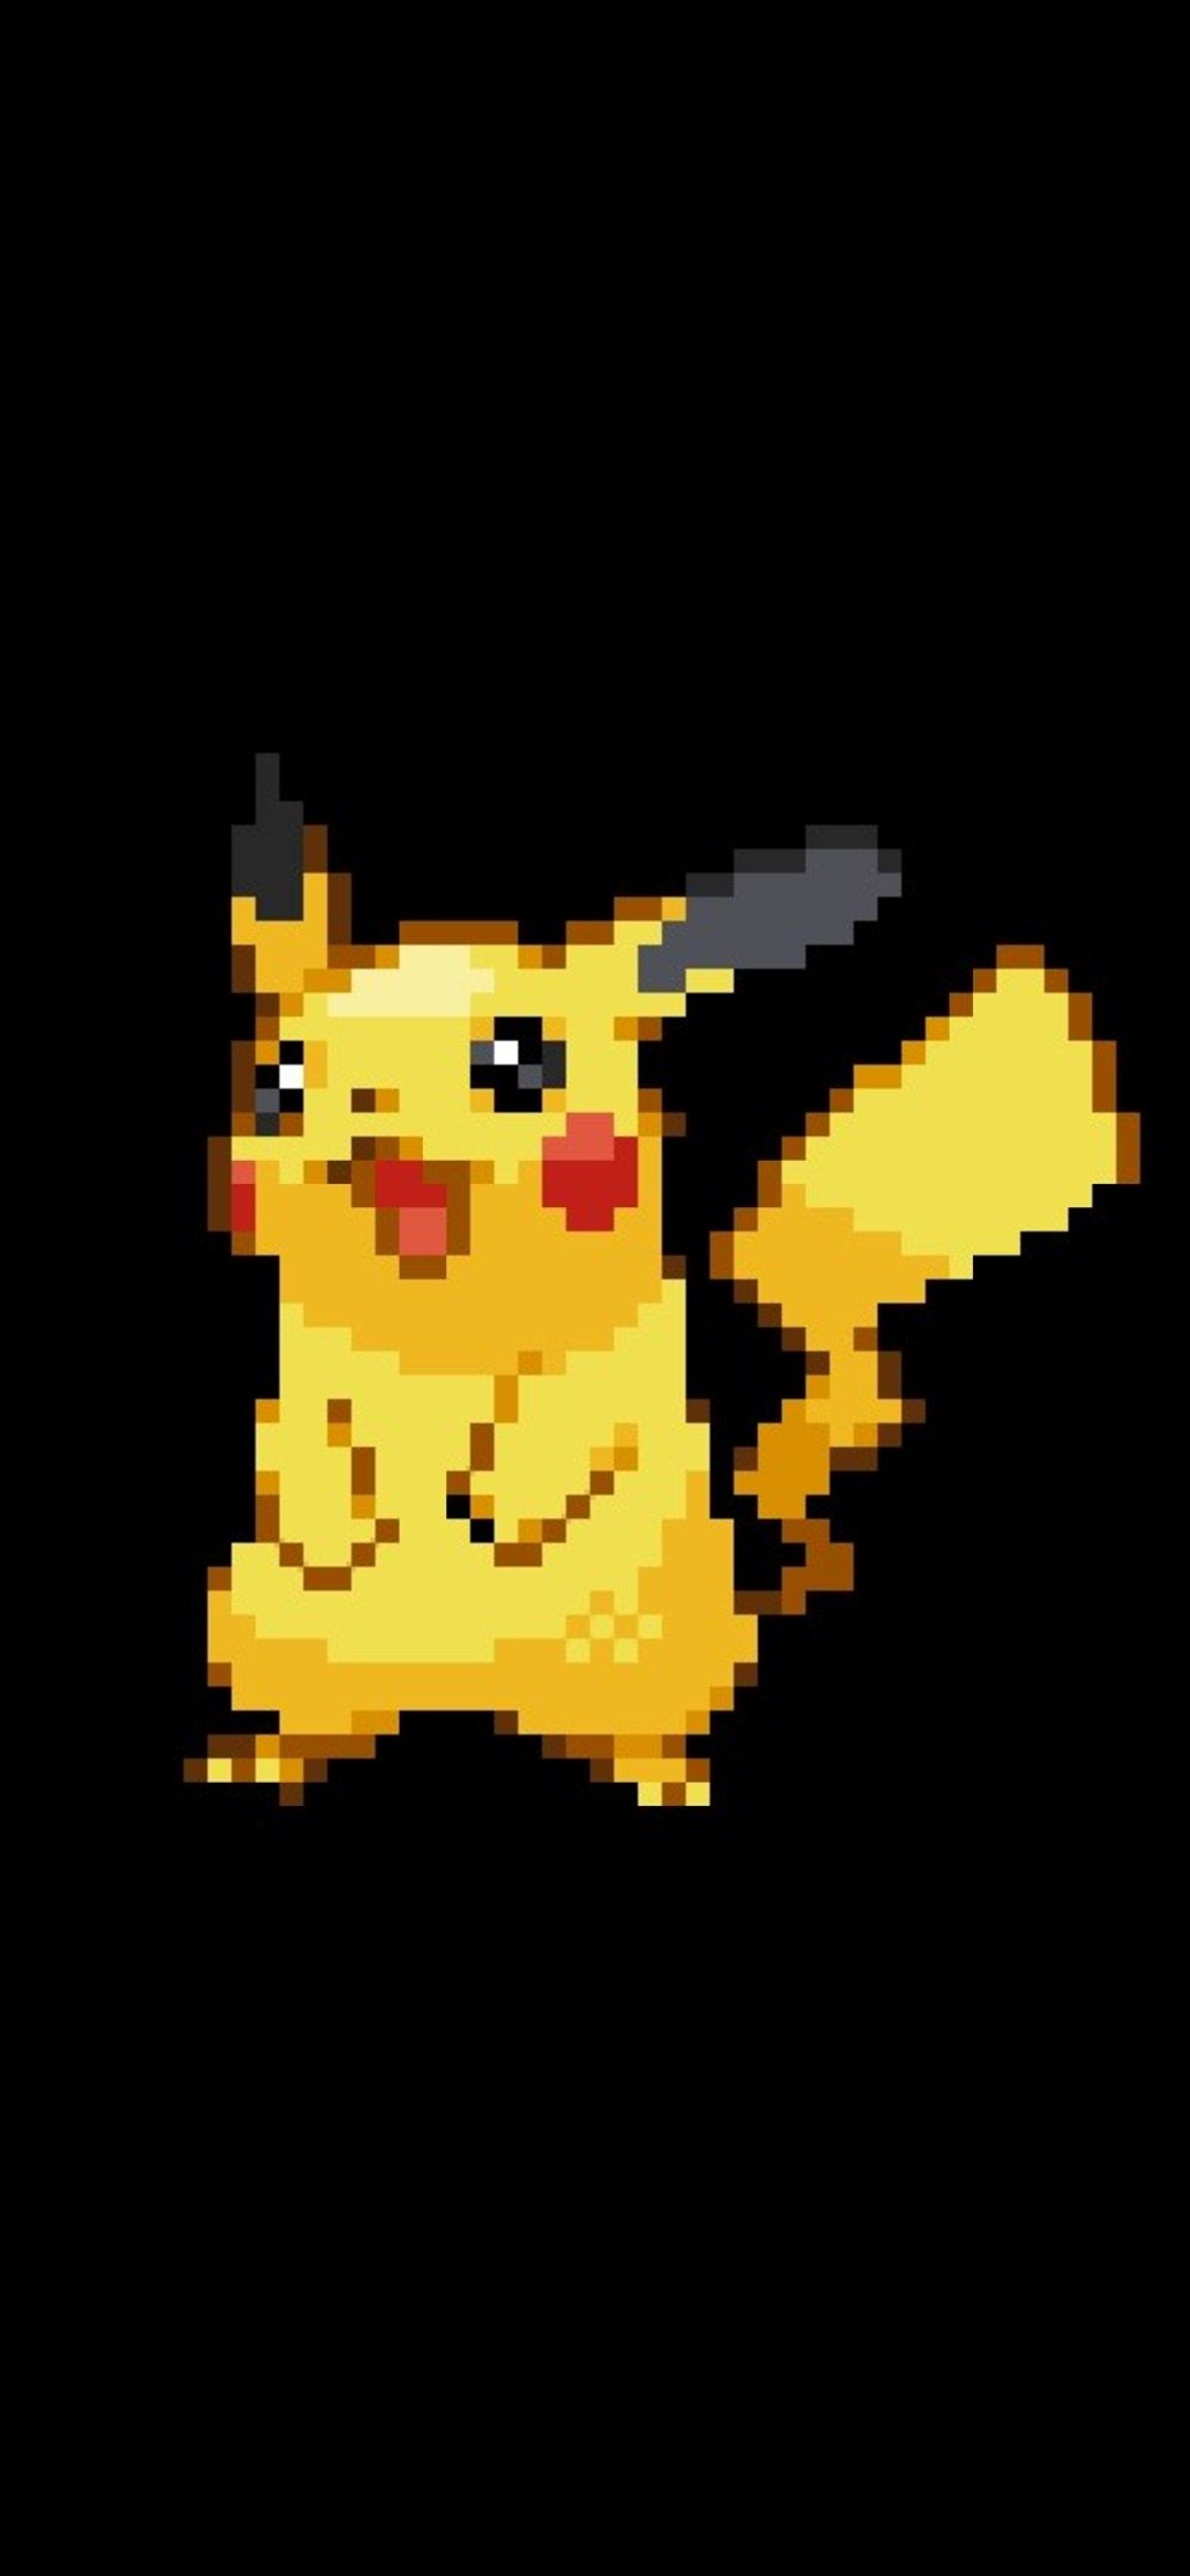 Free Download Pokemon Wallpaper Hd Iphone X Max Hd Wallpaper 1242x26 For Your Desktop Mobile Tablet Explore 36 Pokemon Iphone X Wallpapers Iphone Wallpaper Pokemon X Wallpaper Pokemon